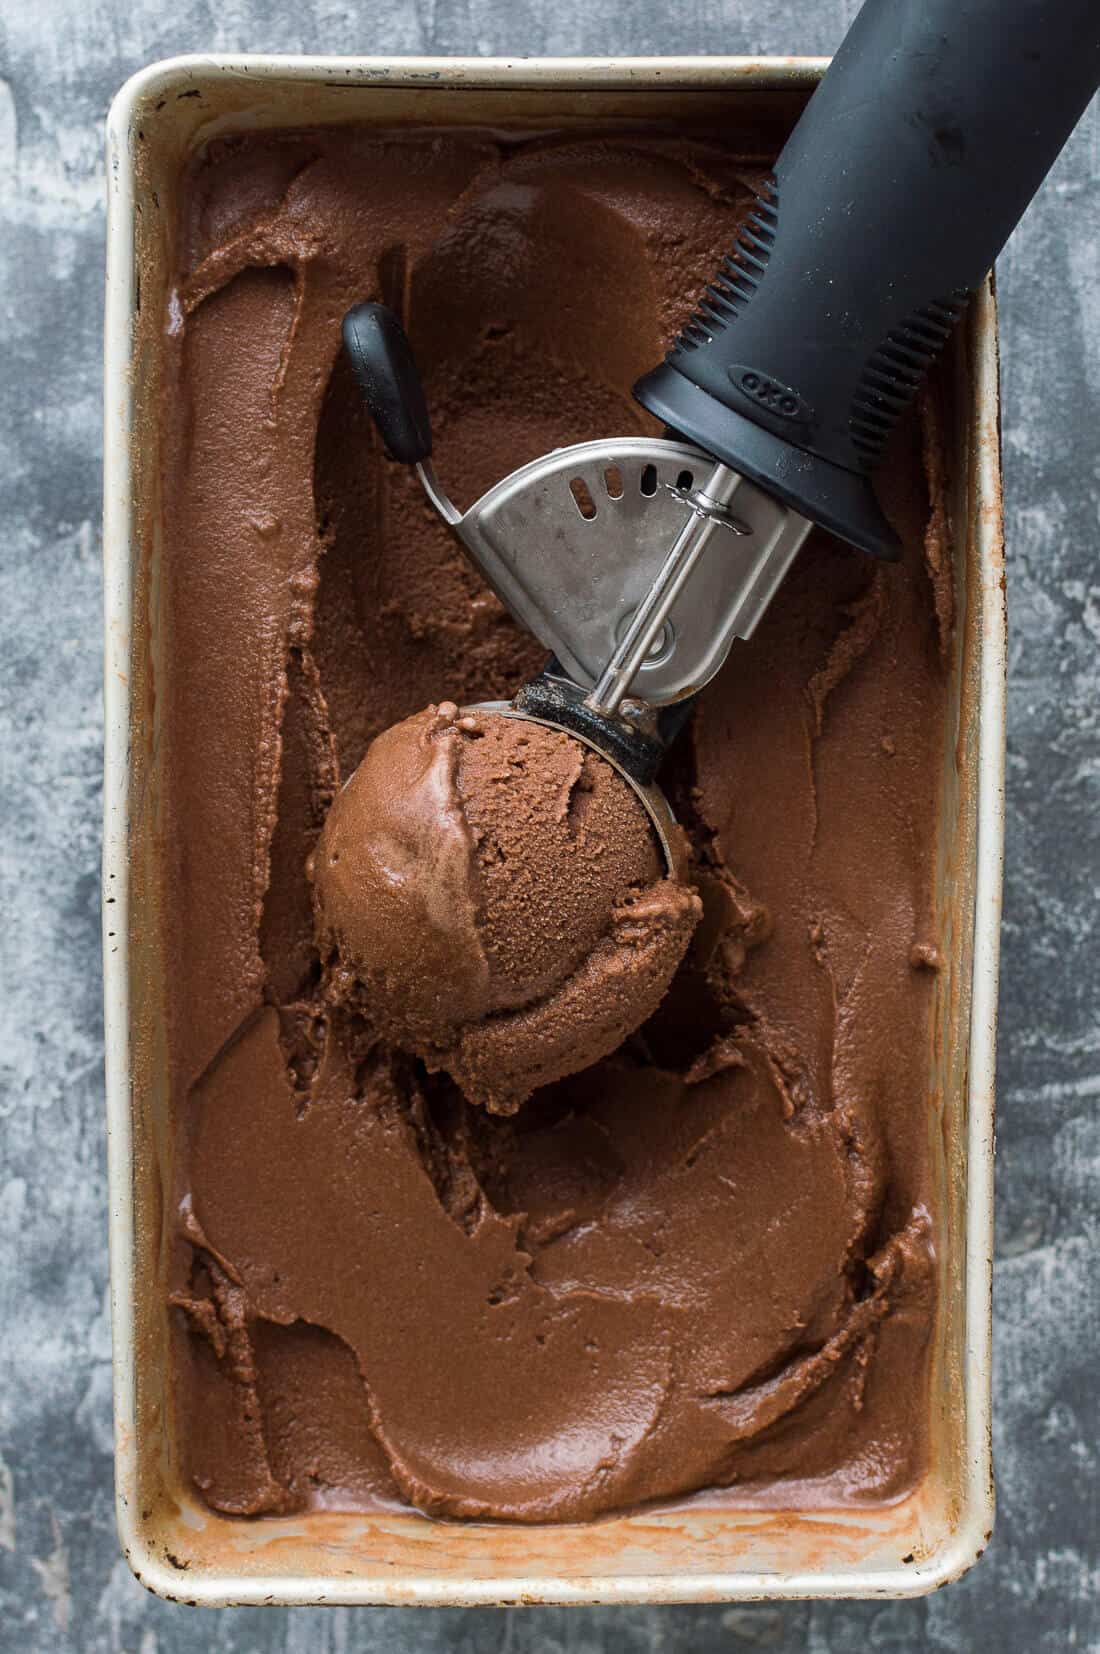 A tub of vegan chocolate coconut sorbet with an ice cream scoop.